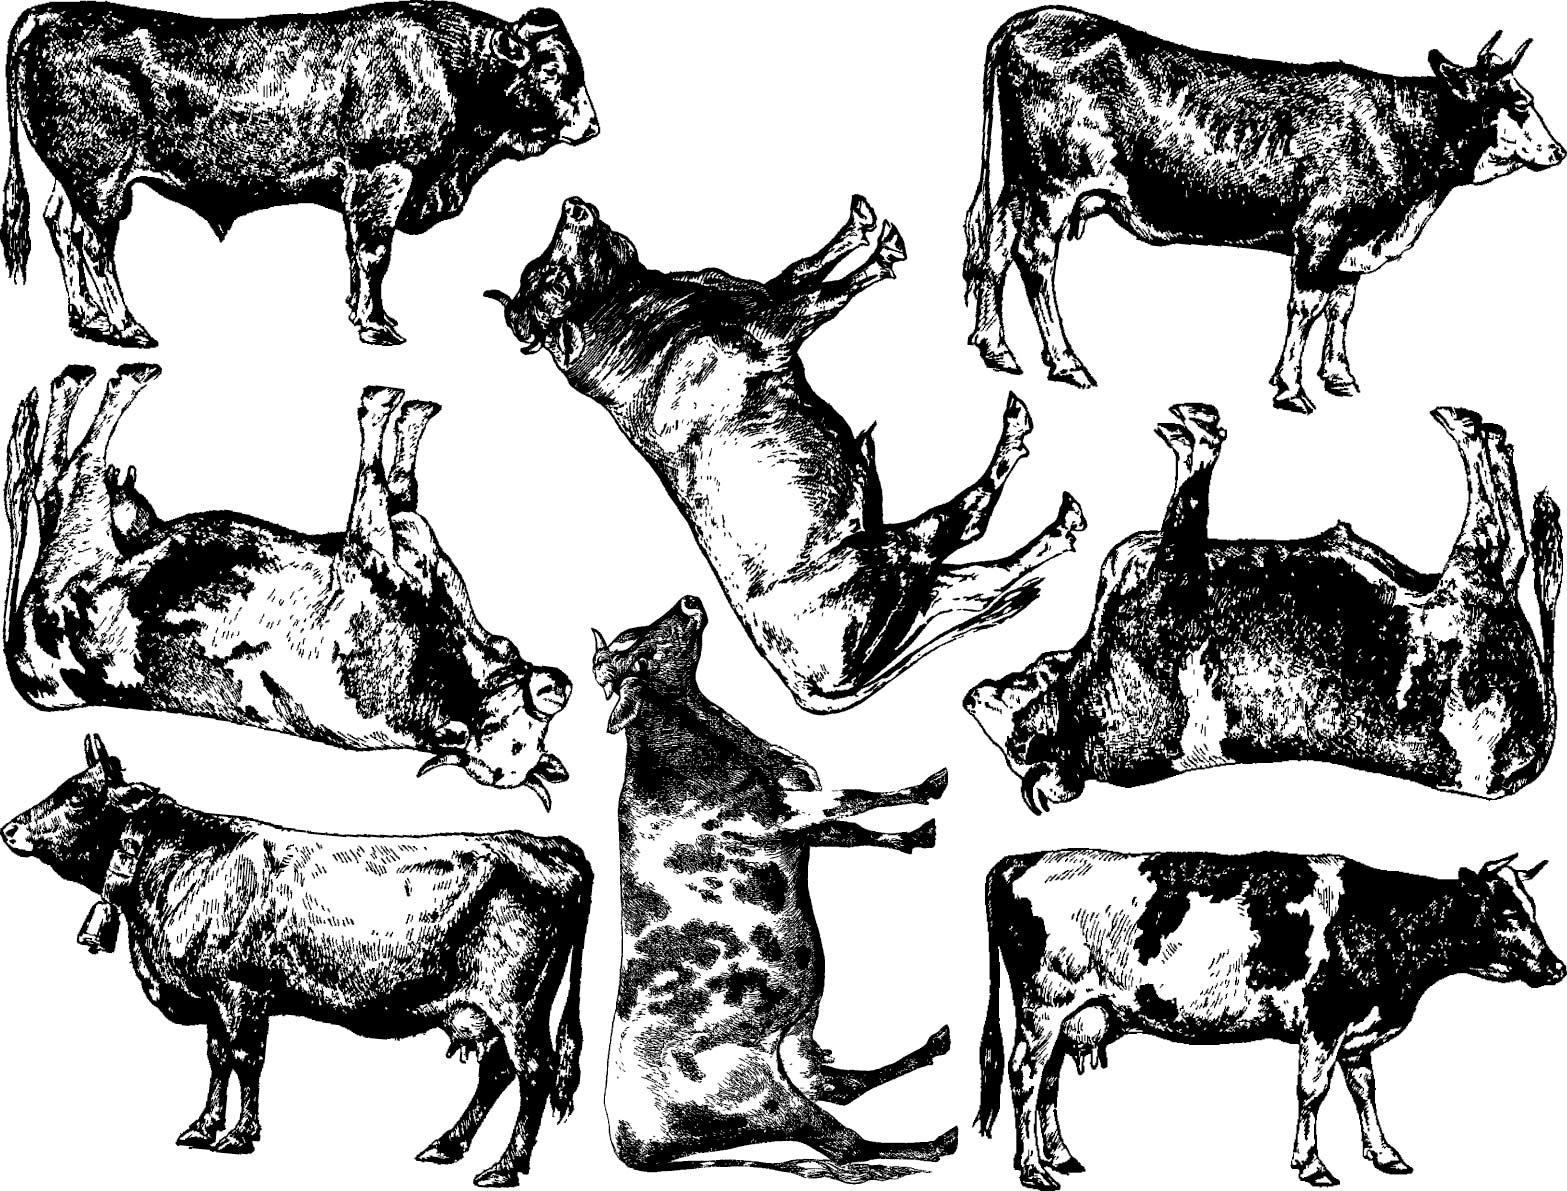 Ceramic Decal or Glass Fusing Decals to Choose from Bandana Cow Enamel 3 Different Size Sheet Enamel Decal 15311 Glass Decal Images Waterslide Decal Choose Either Ceramic 